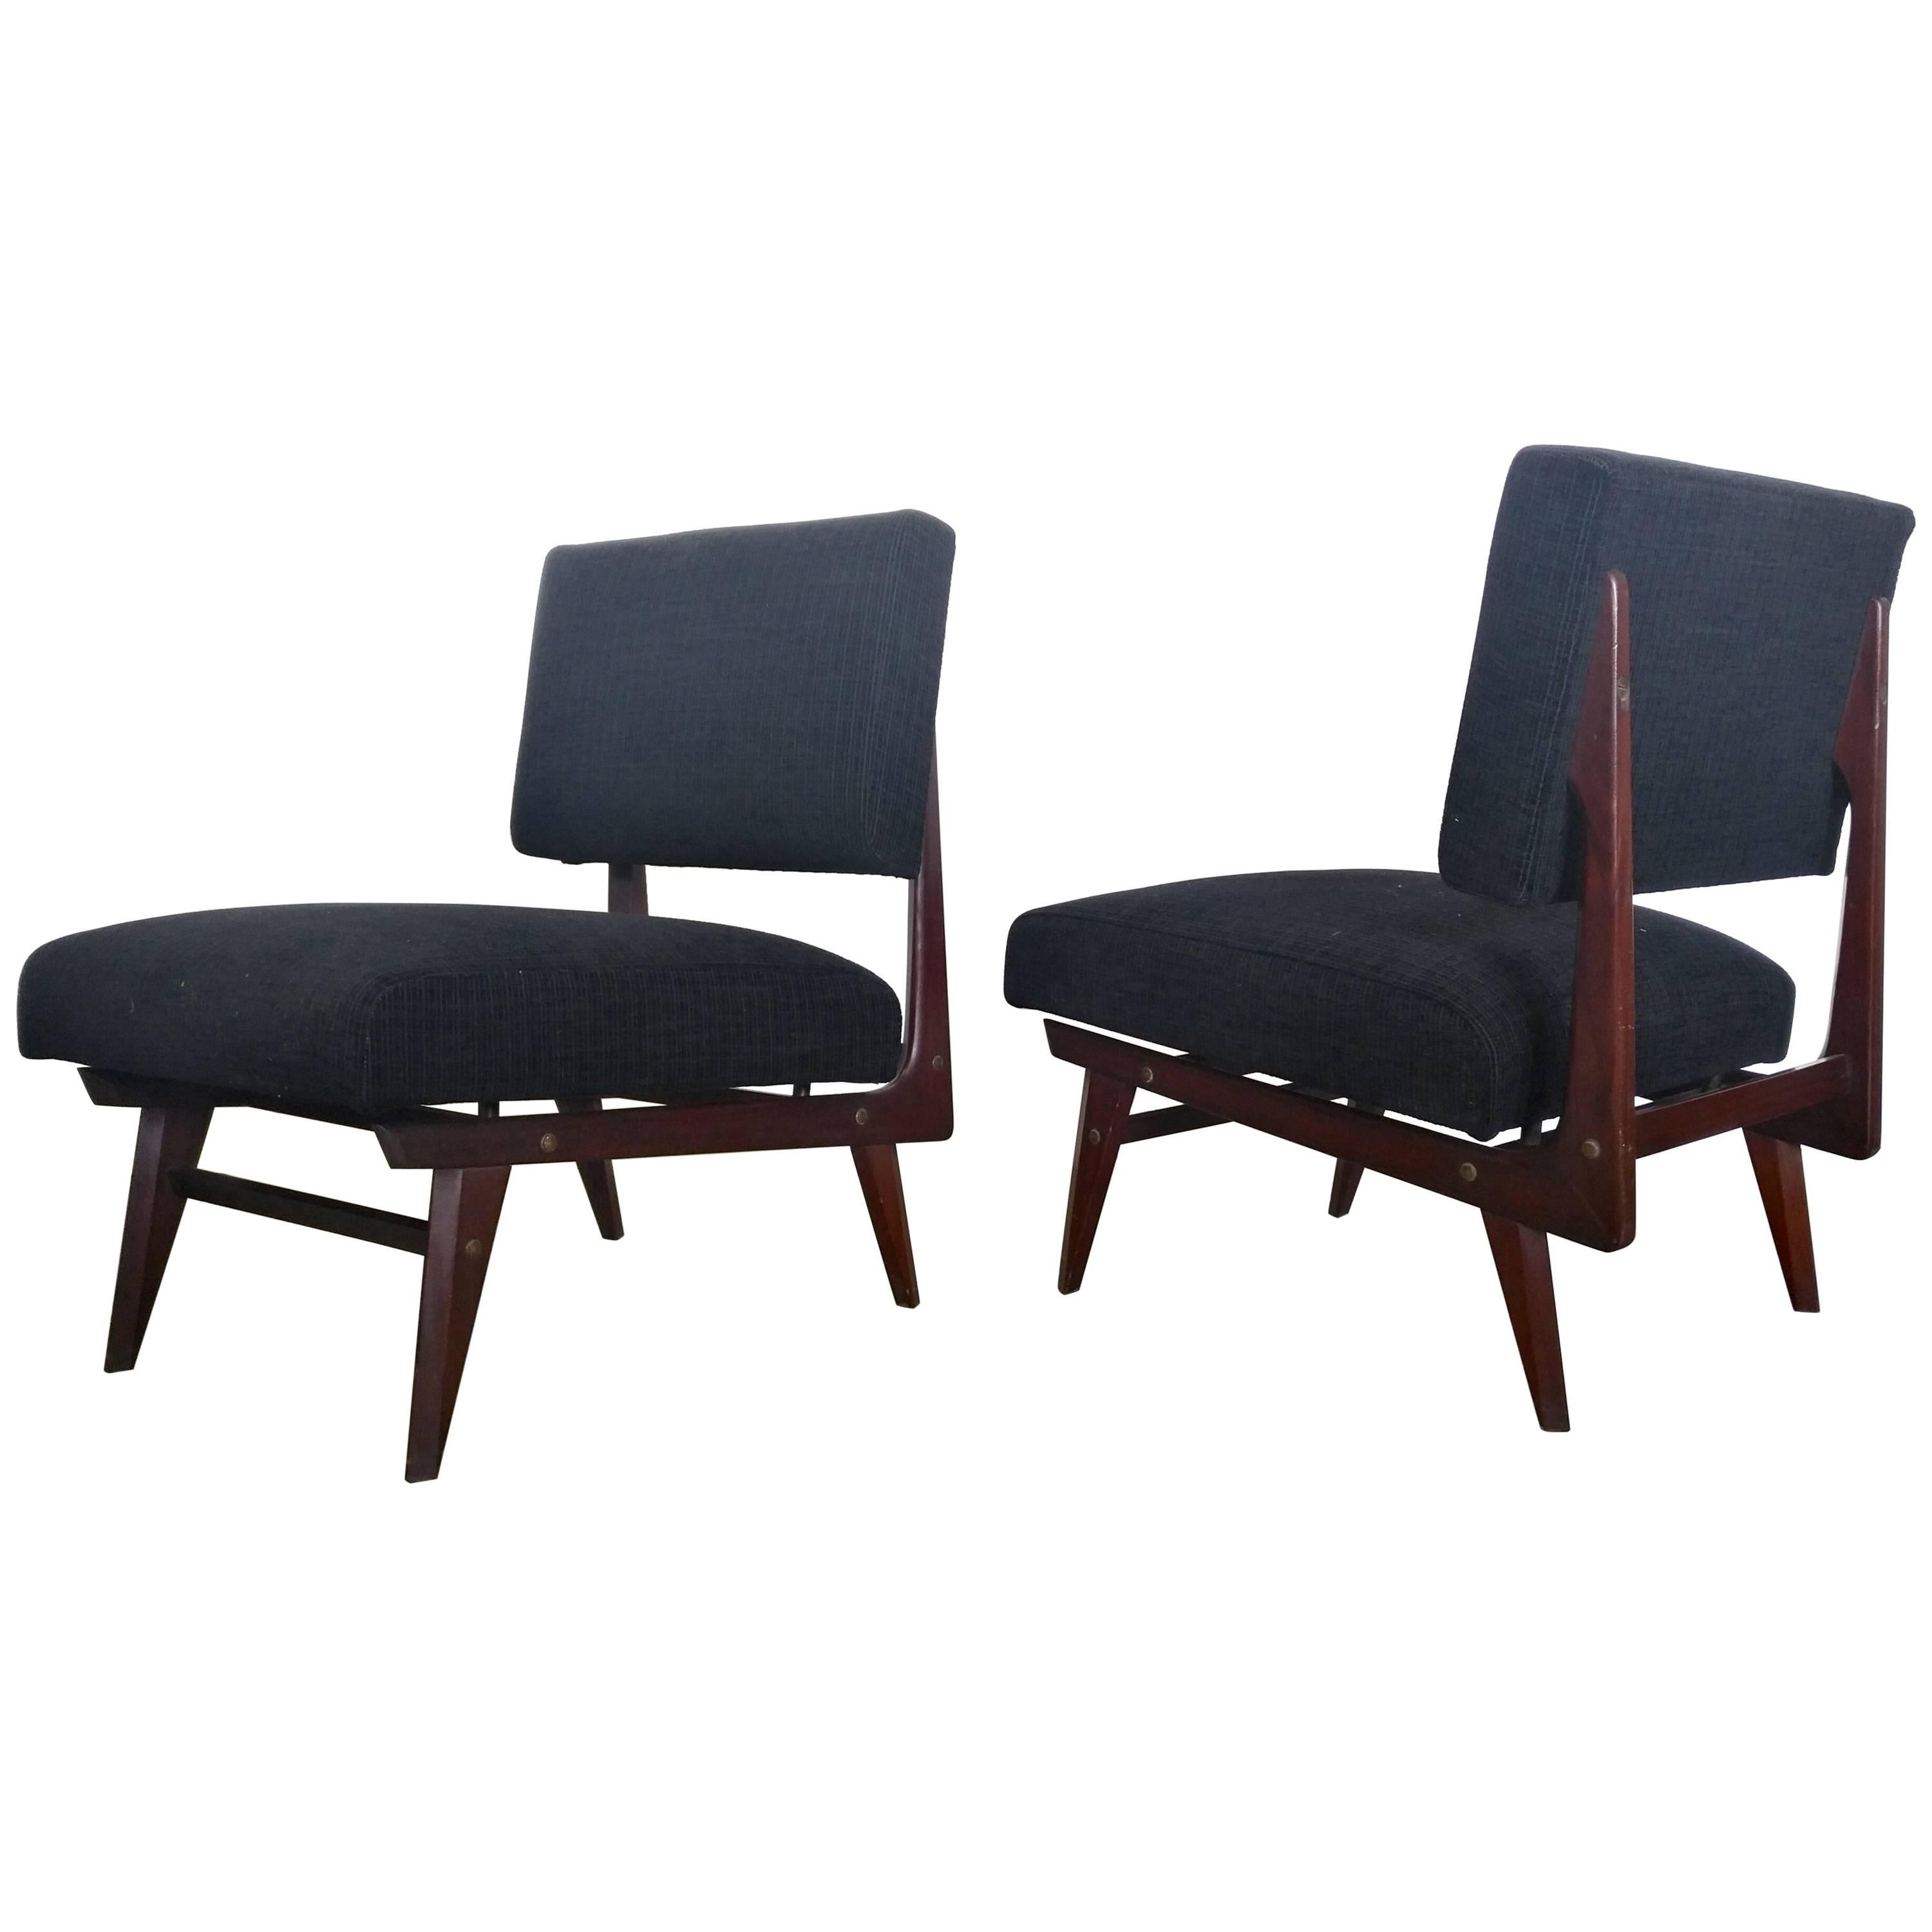 1950 "Dassi Arredamenti" Armchairs in Mahogany Wood and Black Velvet Seat For Sale